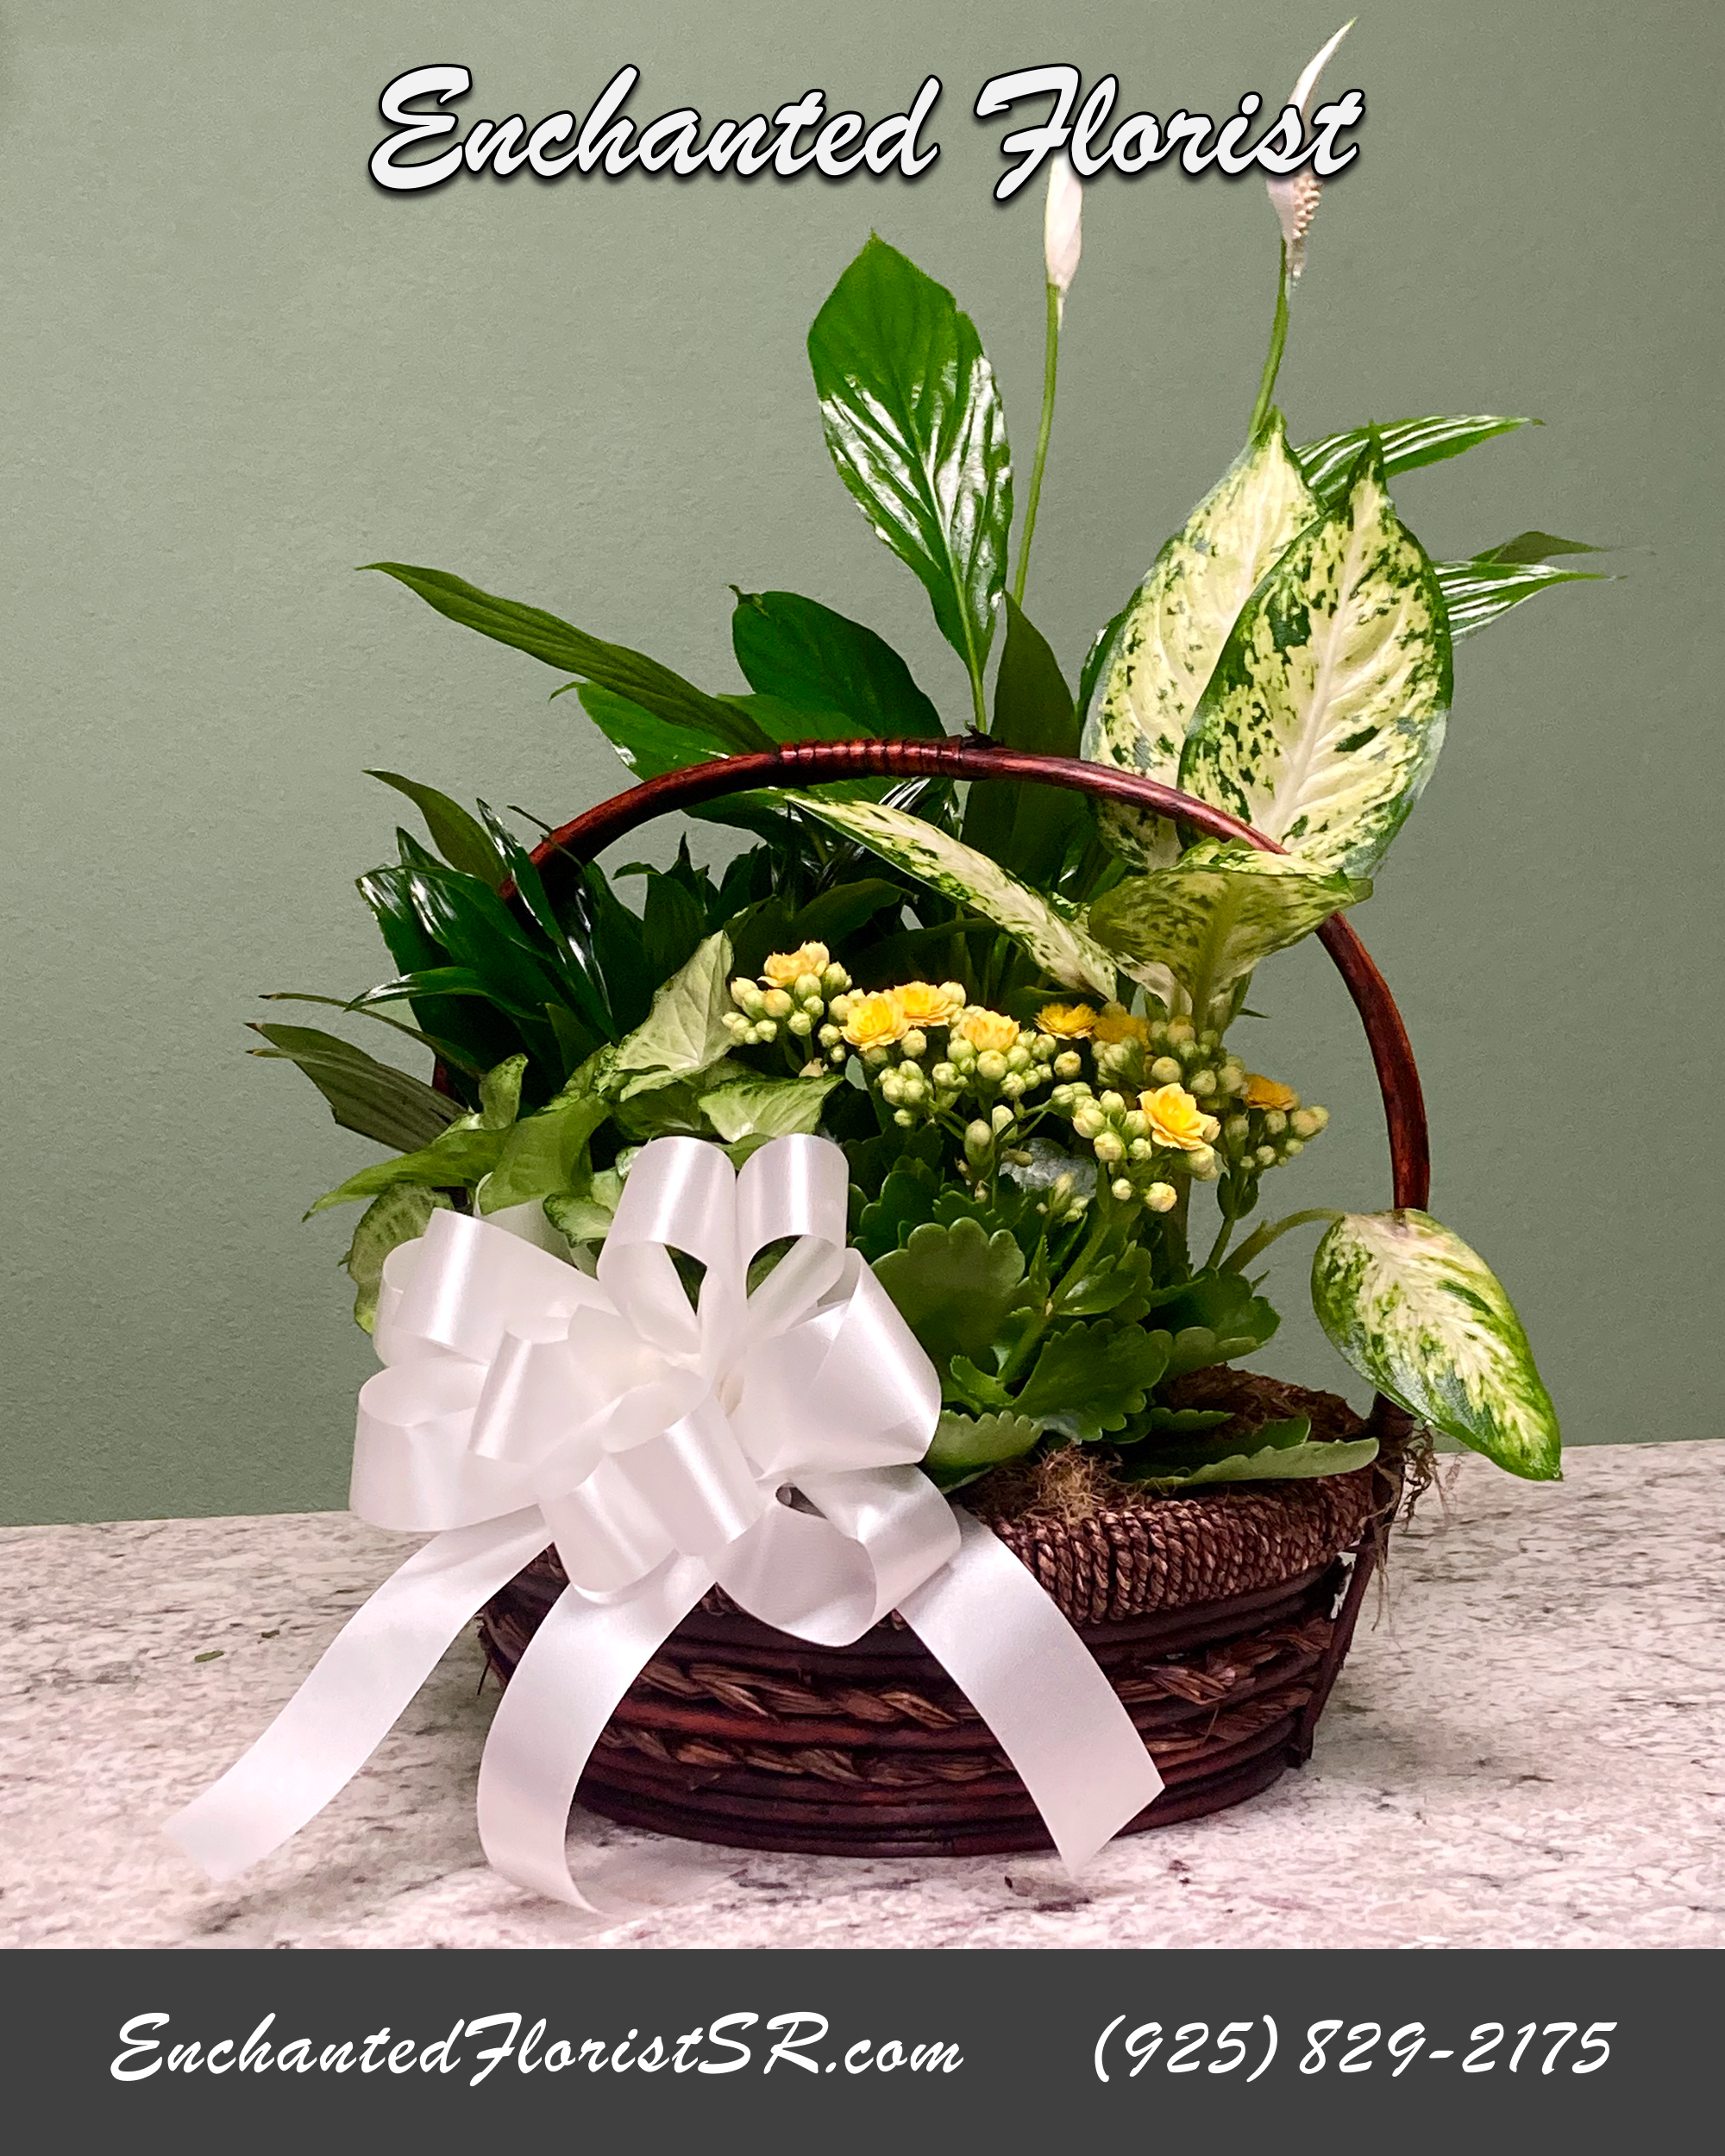 Peace Lily Garden Basket - Peace Lily Garden Basket is a mixed plant garden featuring Spathiphyllum, also known as the Peace Lily. This dark leafy plant has delicate white blossoms and makes an elegant gift. The basket also features a Dumb Cane plant (Dieffenbachia) and a yellow Kalanchoe plant.  Arrives In: Natural wicker basket w/ handle  Orientation: Any-Sided  Approximate Dimensions: 16&quot; Tall 10&quot; Wide